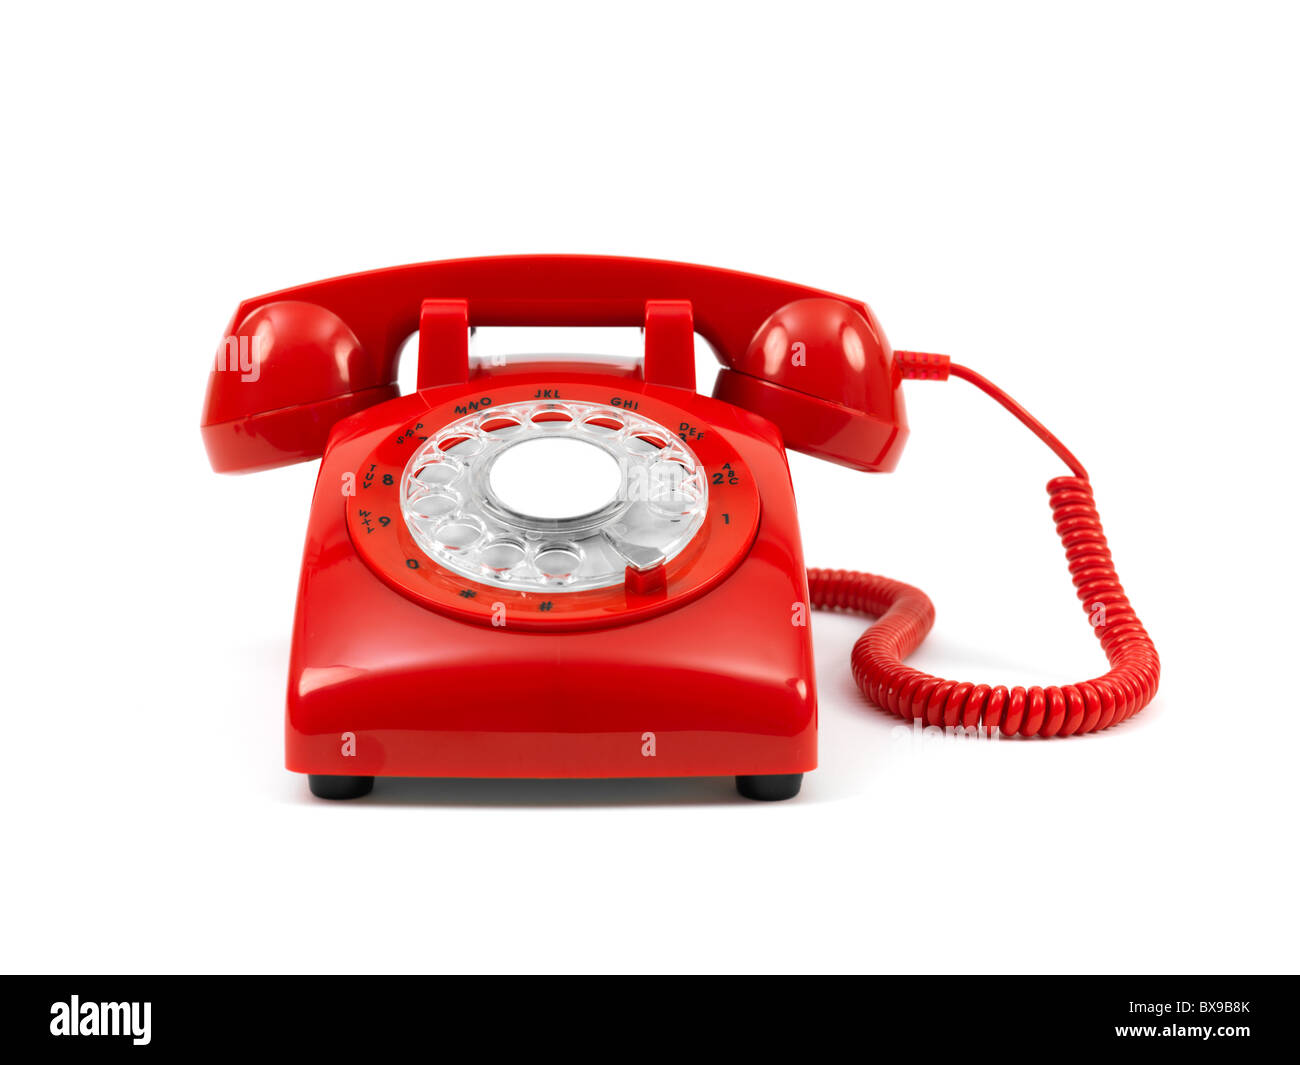 A vintage rotary phone Stock Photo